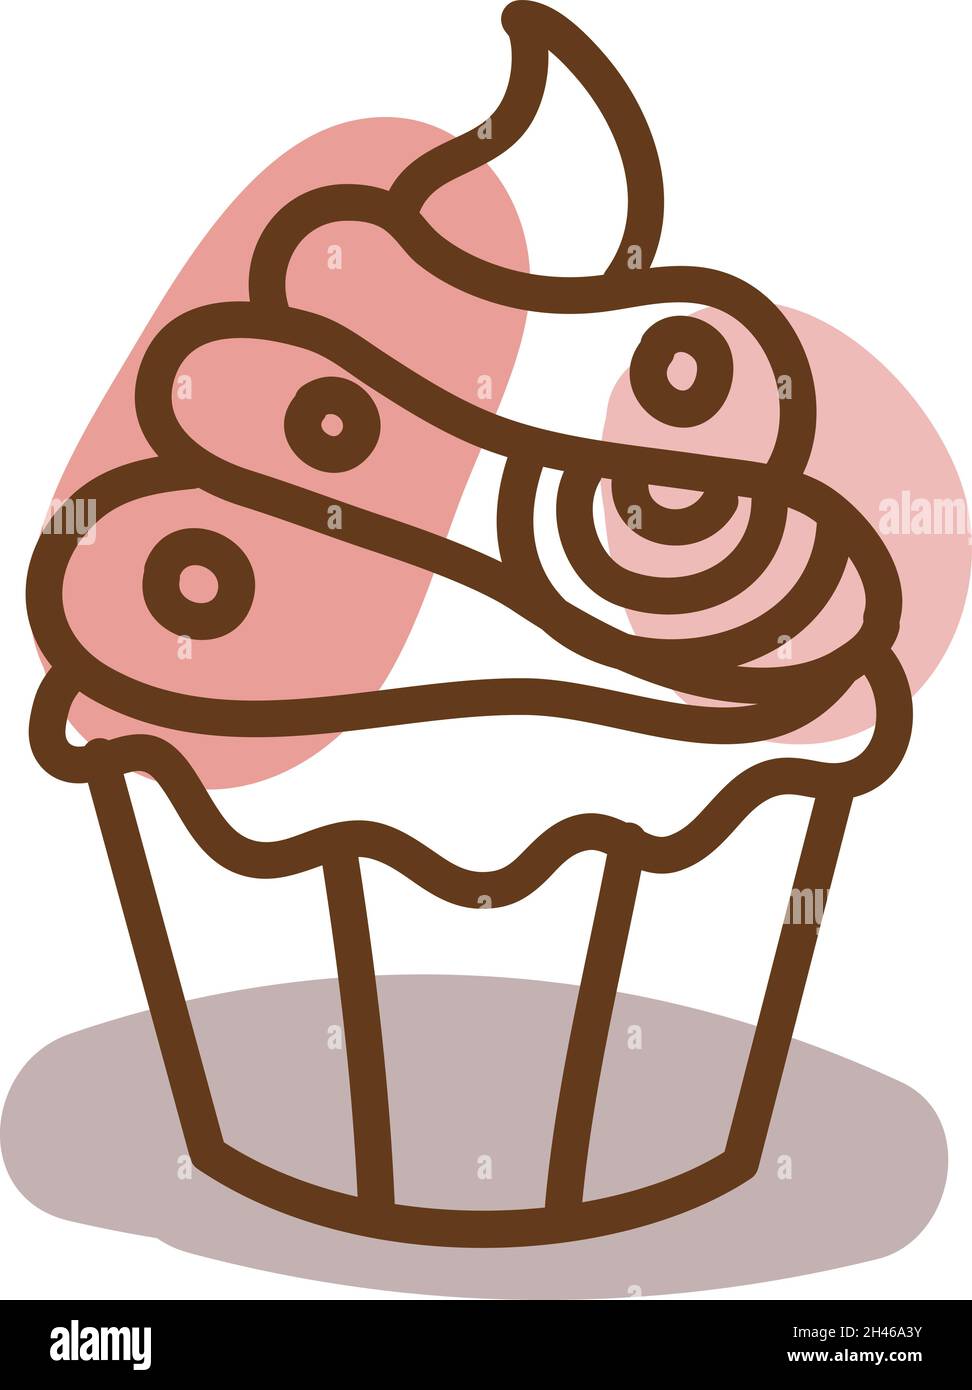 Chocolate cupcake, illustration, vector, on a white background. Stock Vector